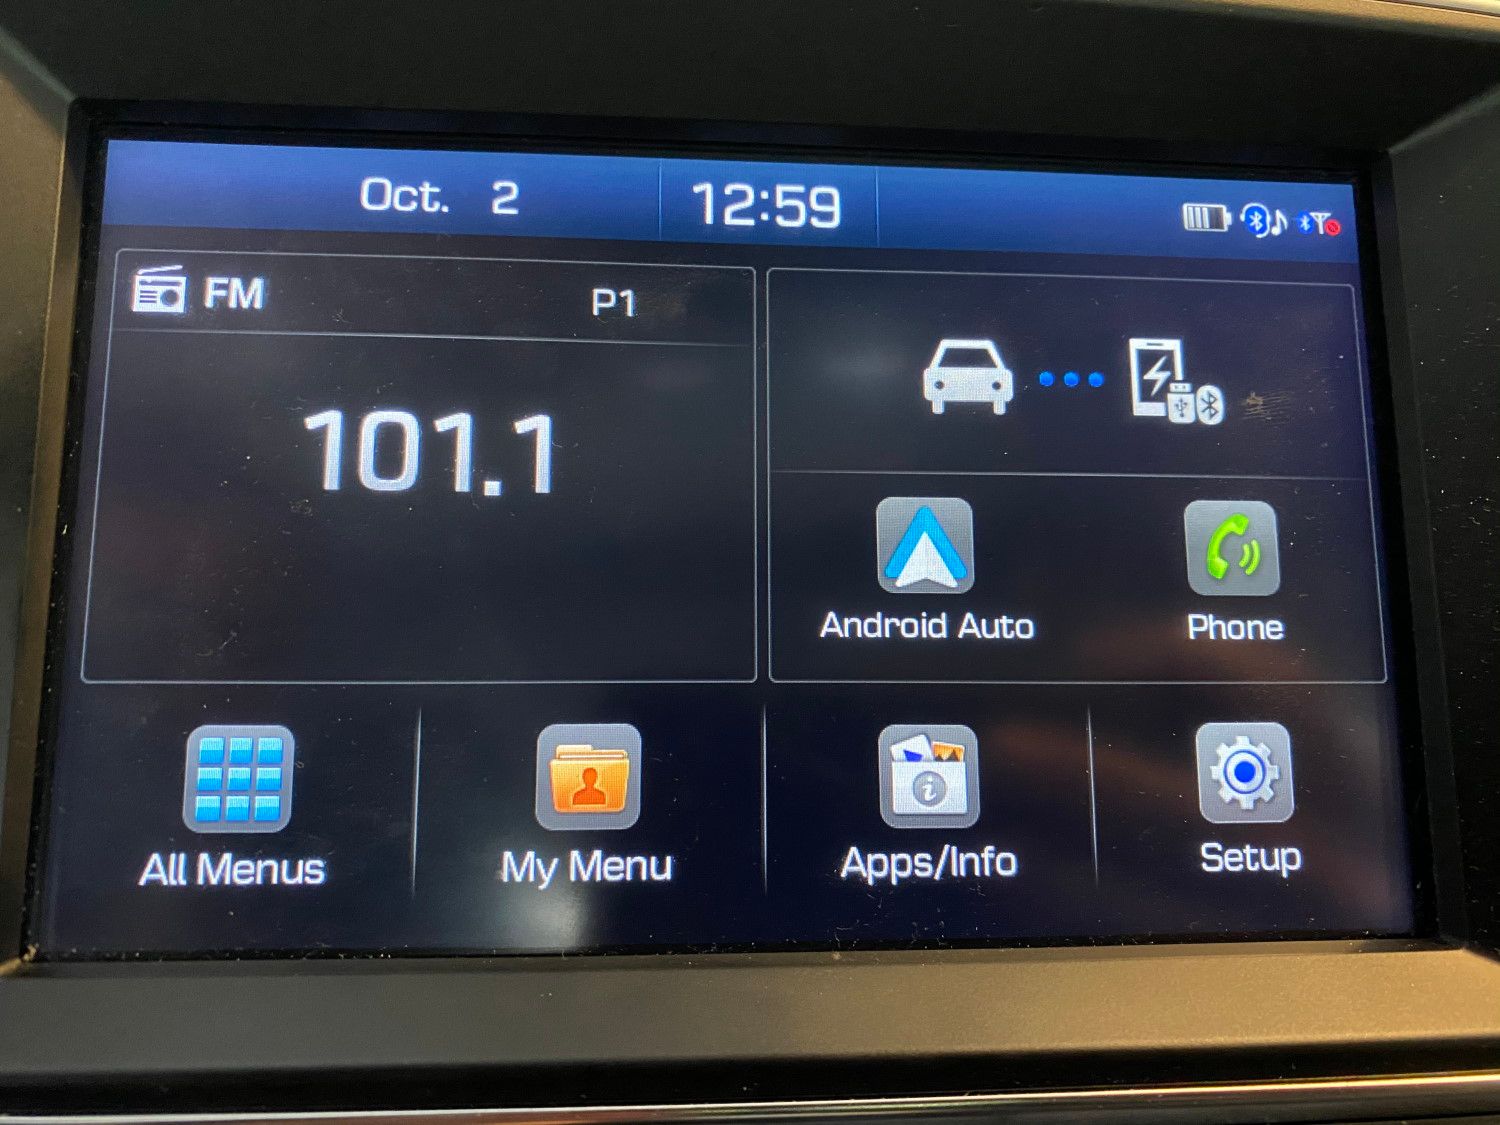 Why Is Android Auto Not Working? 8 Troubleshooting Fixes